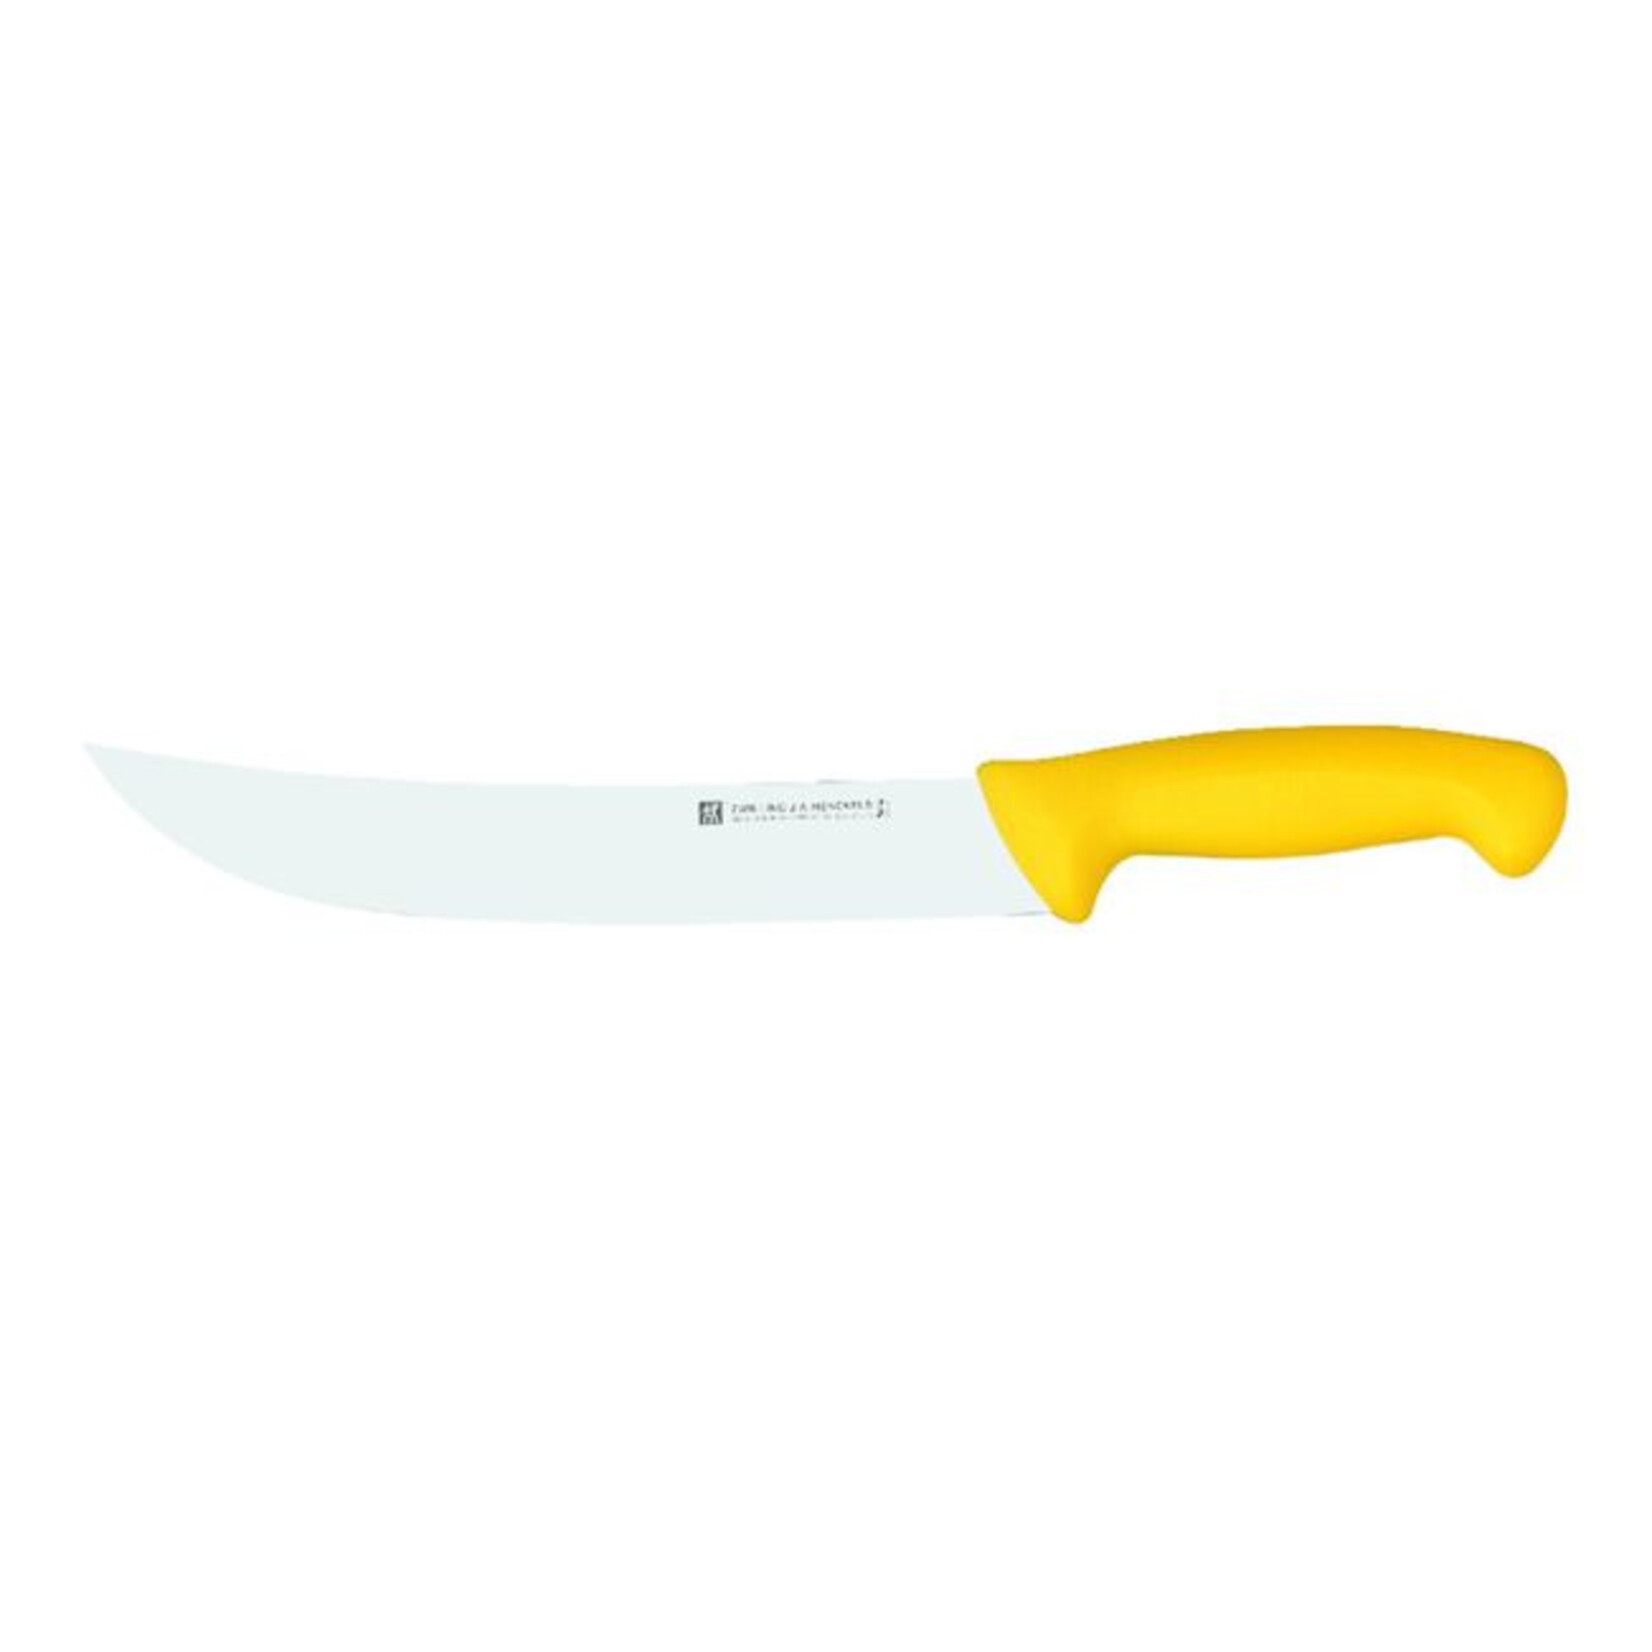 TWIN MASTER 32136-250  -  COUTEAU CHEF 10" JAUNE TWIN ZWILLING